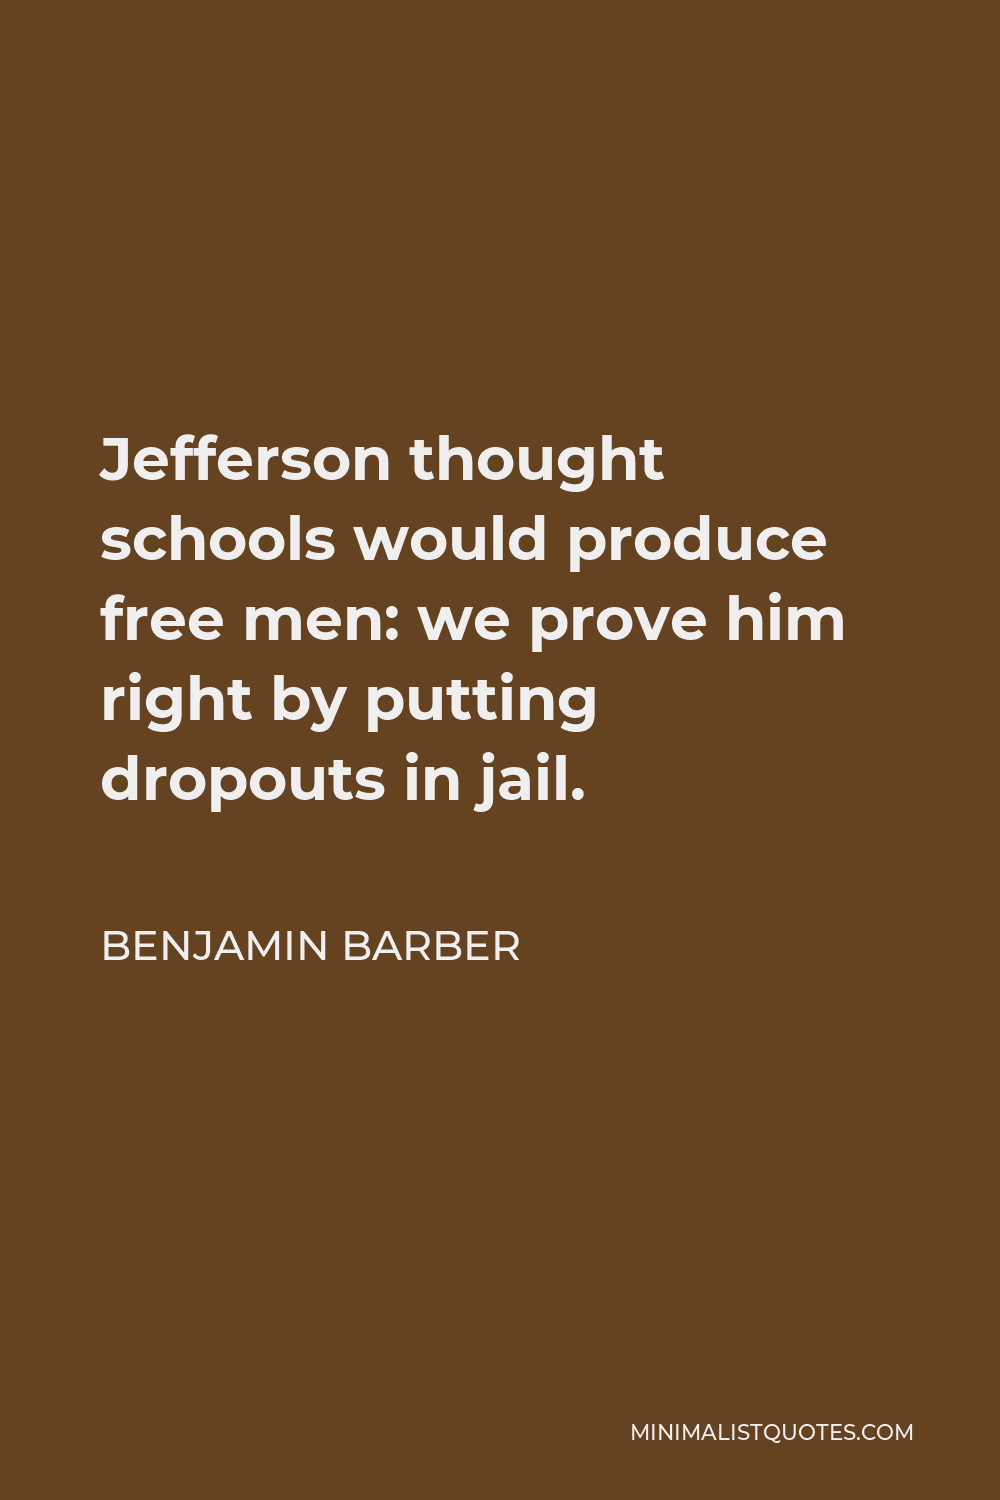 Benjamin Barber Quote - Jefferson thought schools would produce free men: we prove him right by putting dropouts in jail.